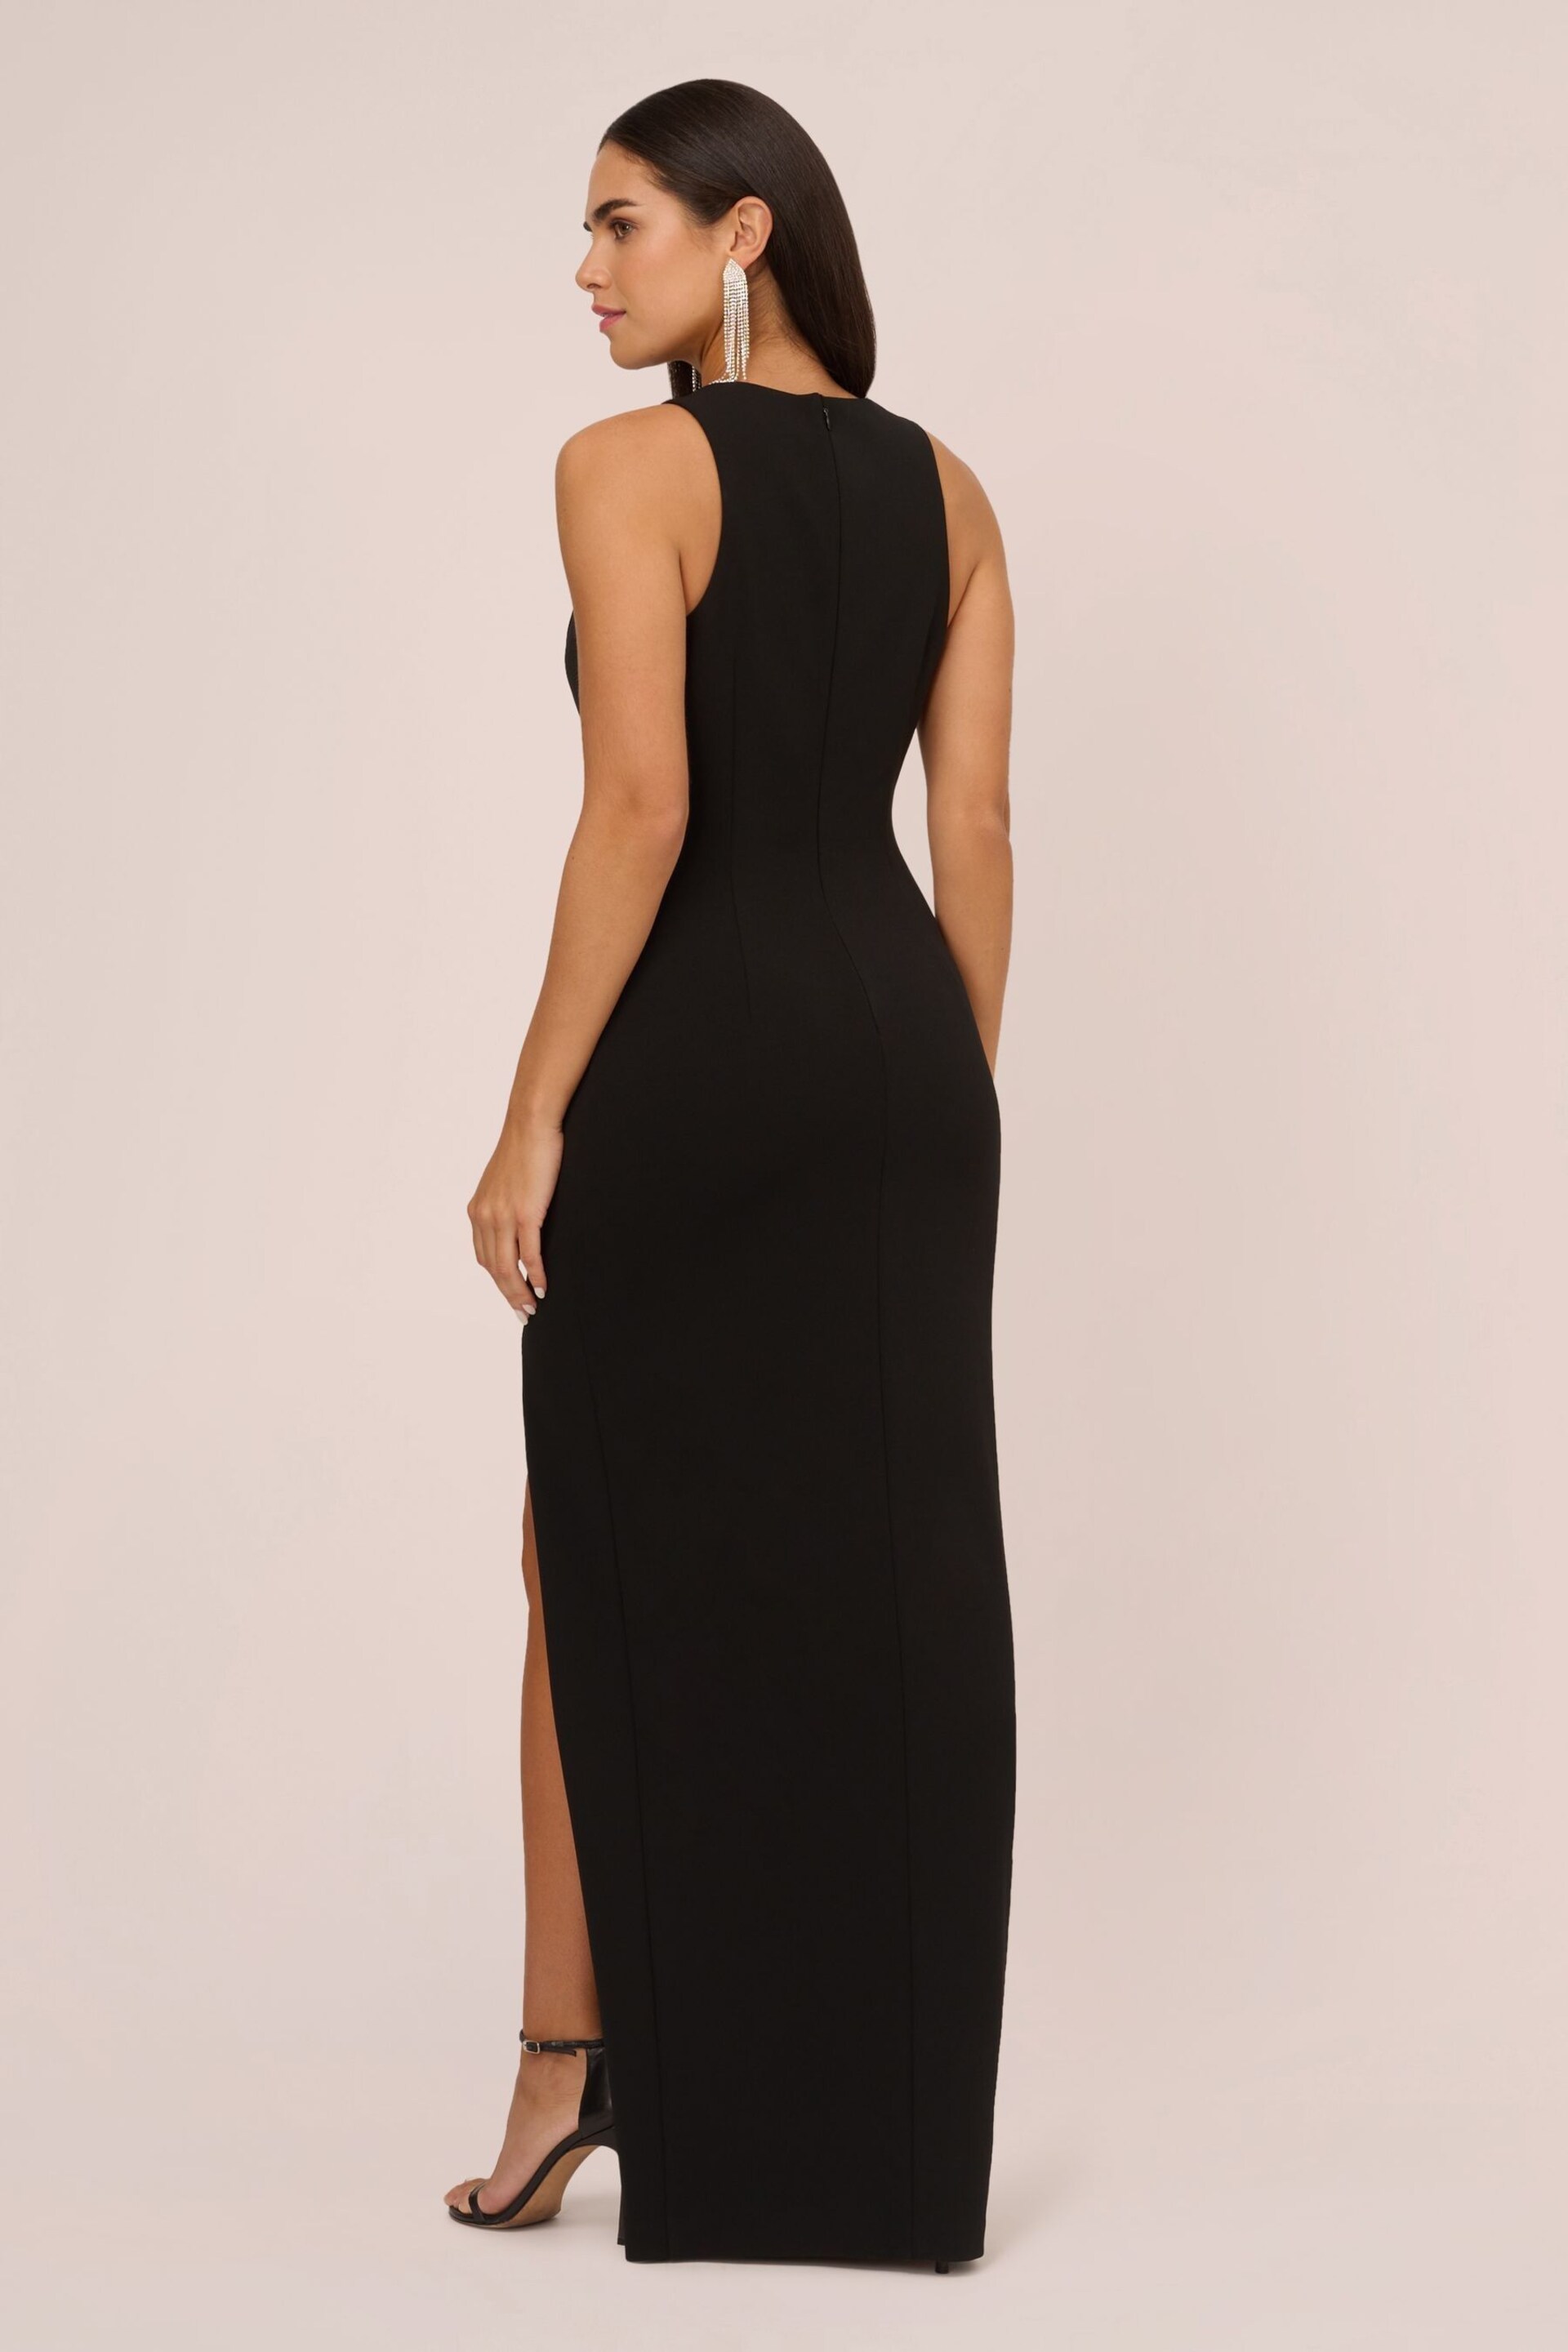 Aidan by Adrianna Papell Sleeveless Knit Crepe Black Gown - Image 2 of 7